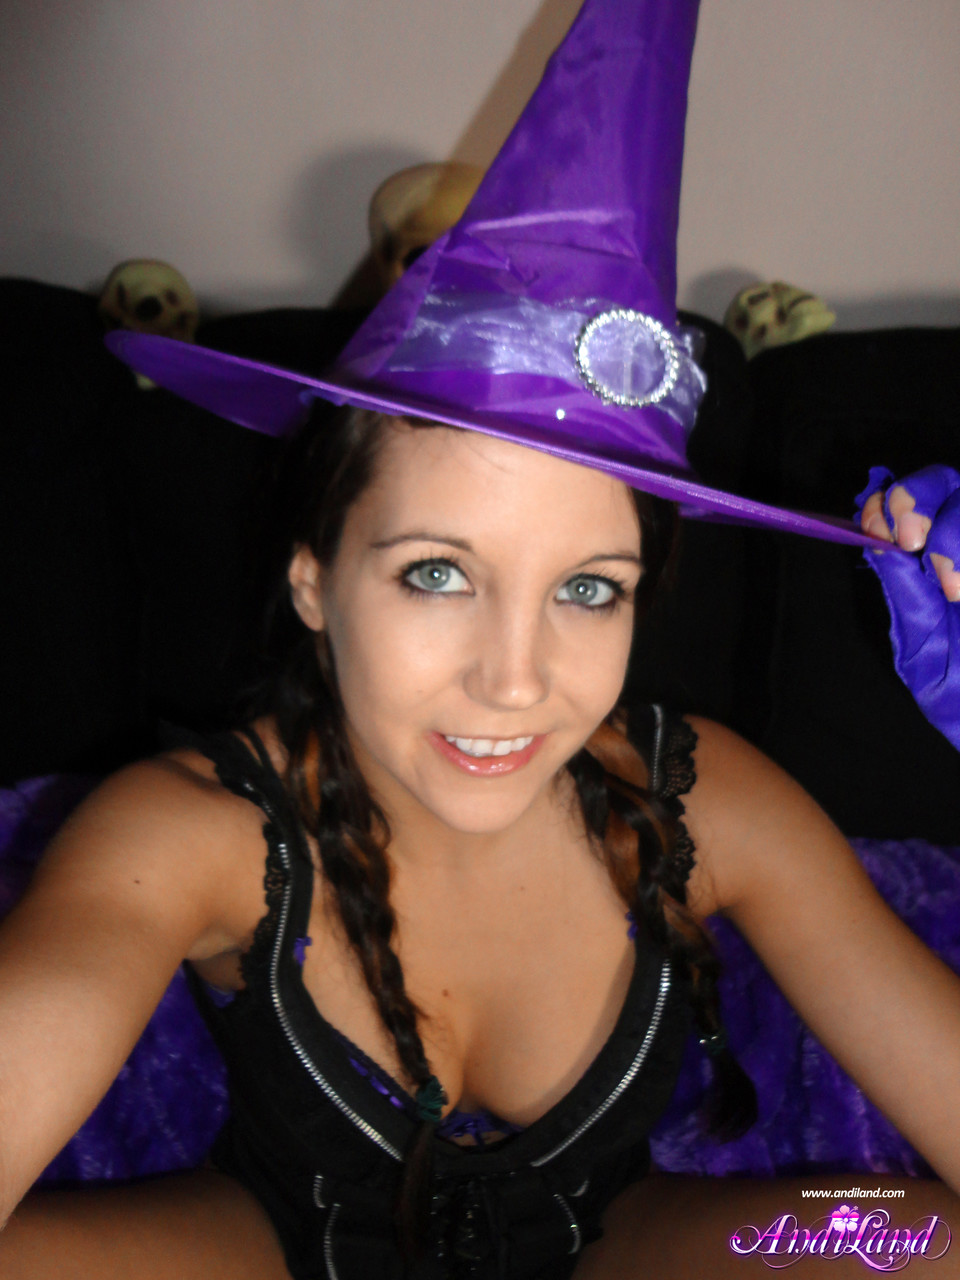 Teen amateur Andi Land teases during upskirt action in a Halloween outfit porno fotoğrafı #428432666 | Andi Land Pics, Andi Land, Cosplay, mobil porno